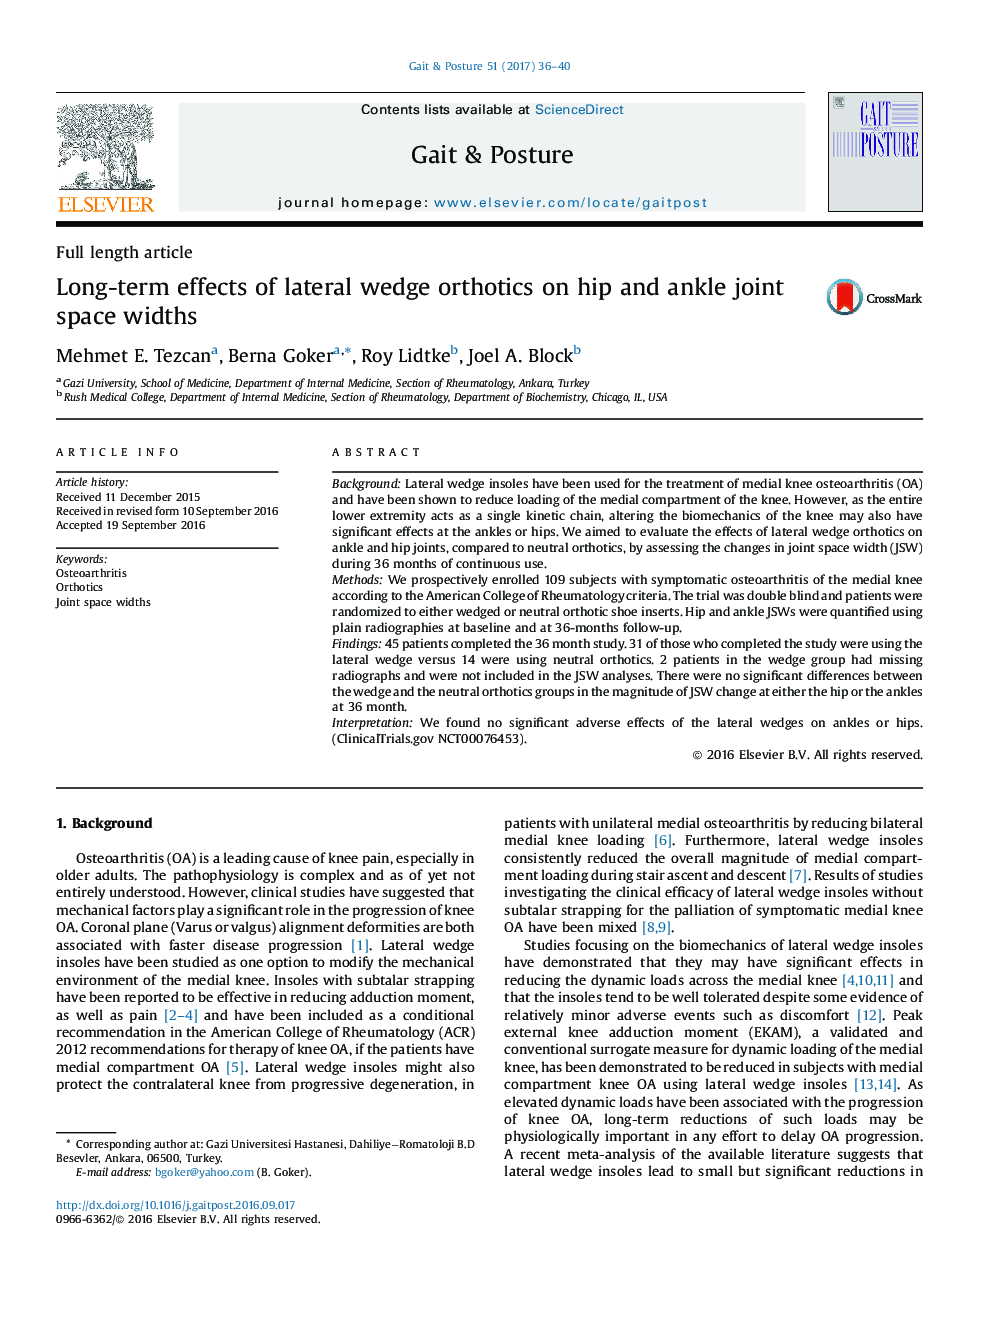 Long-term effects of lateral wedge orthotics on hip and ankle joint space widths